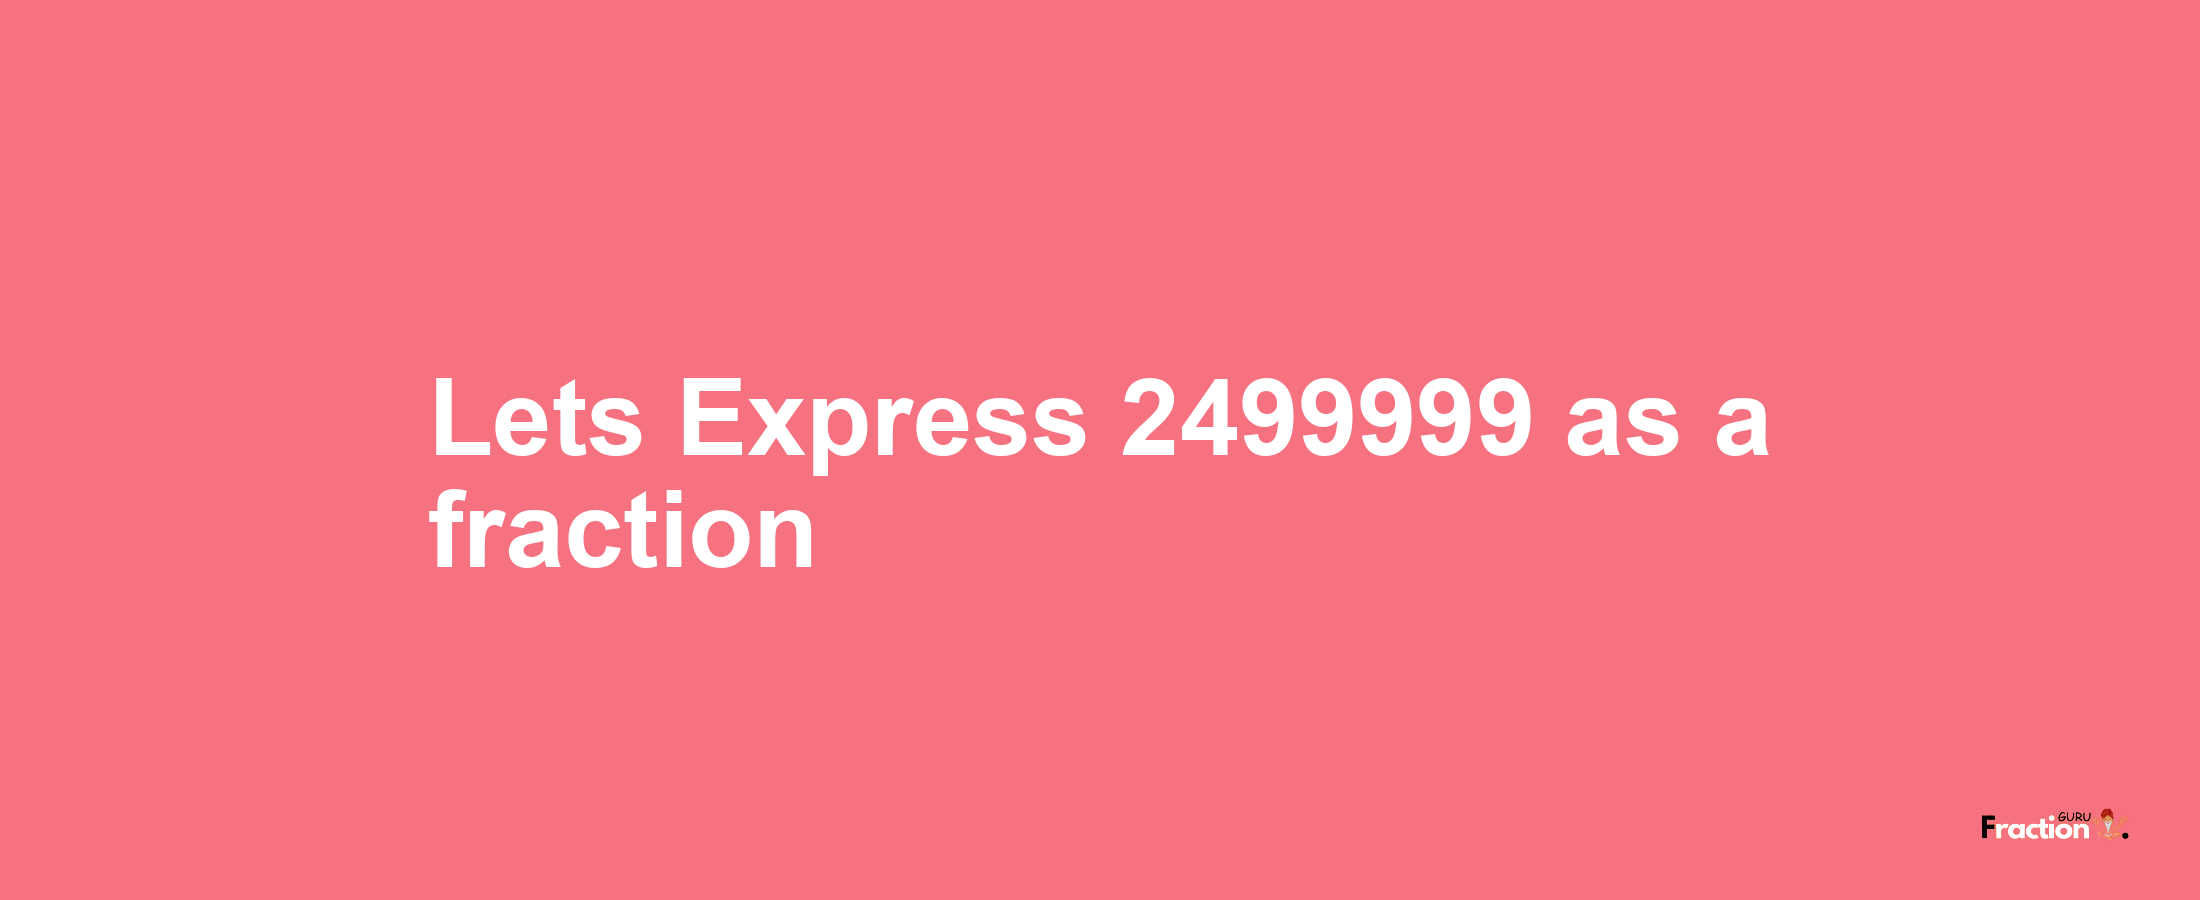 Lets Express 2499999 as afraction